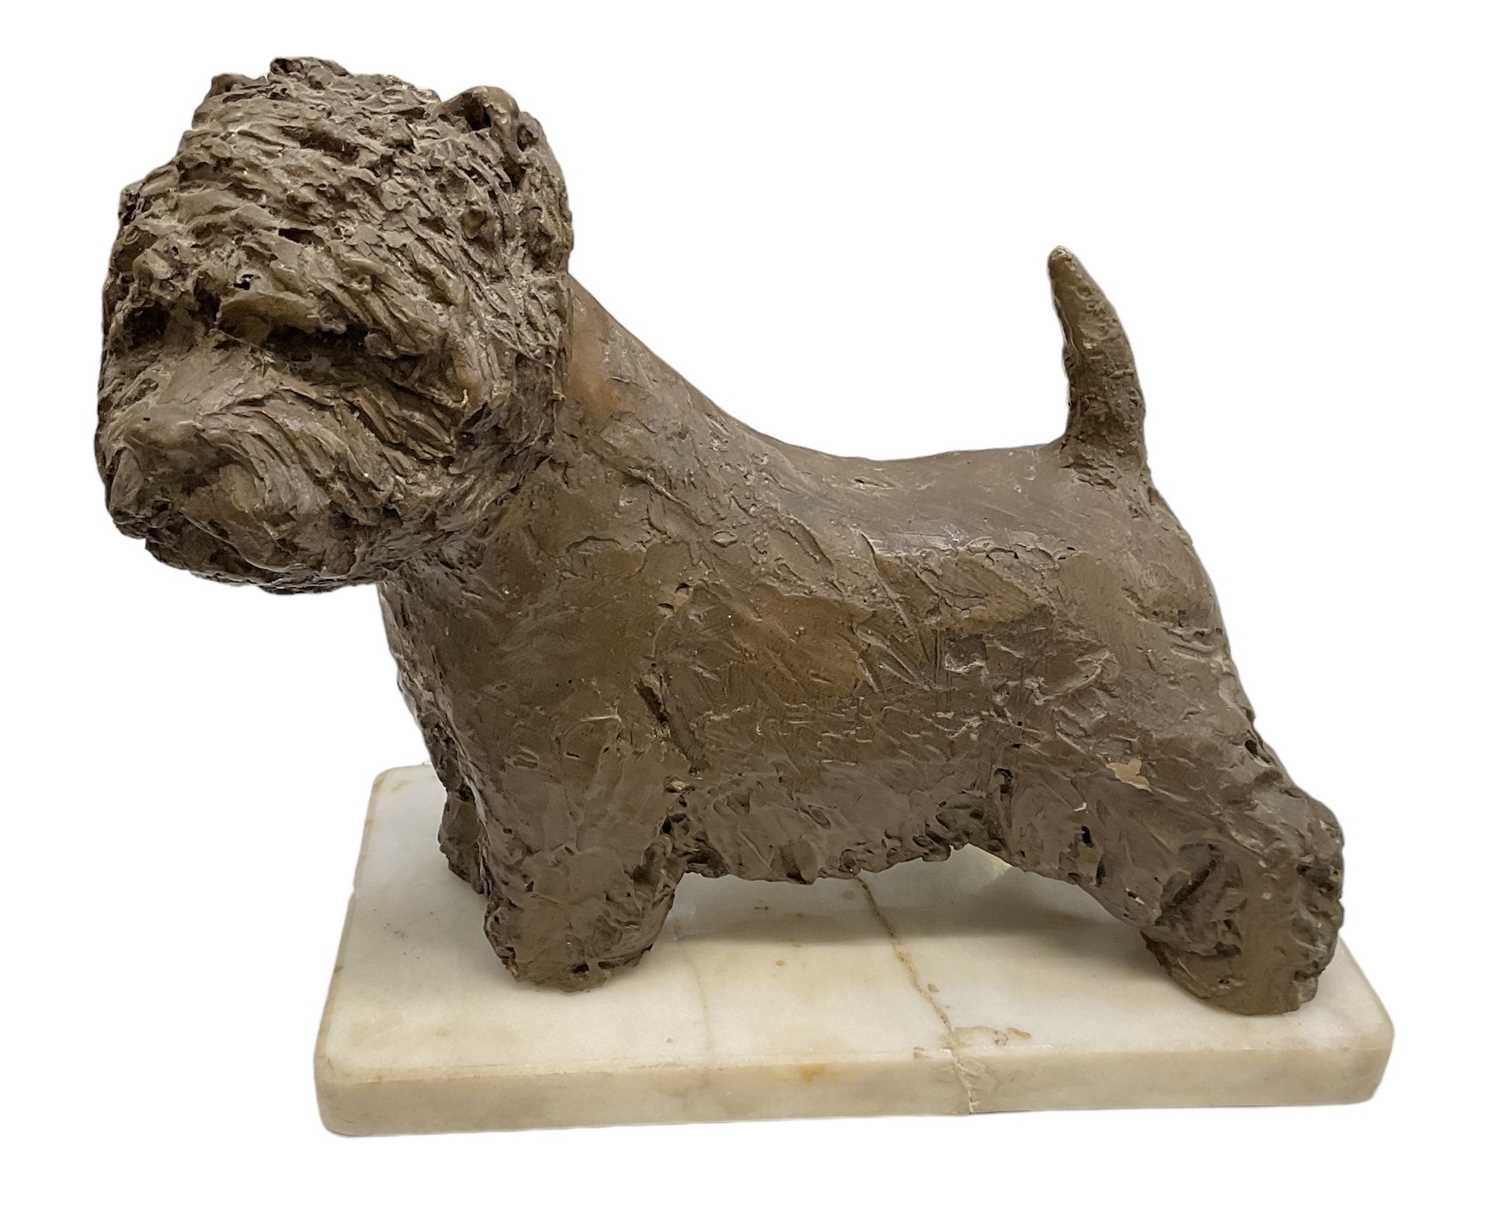 A bronze model of the Supreme Champion at Crufts dog "Olac moon pilot", on white marble base, height